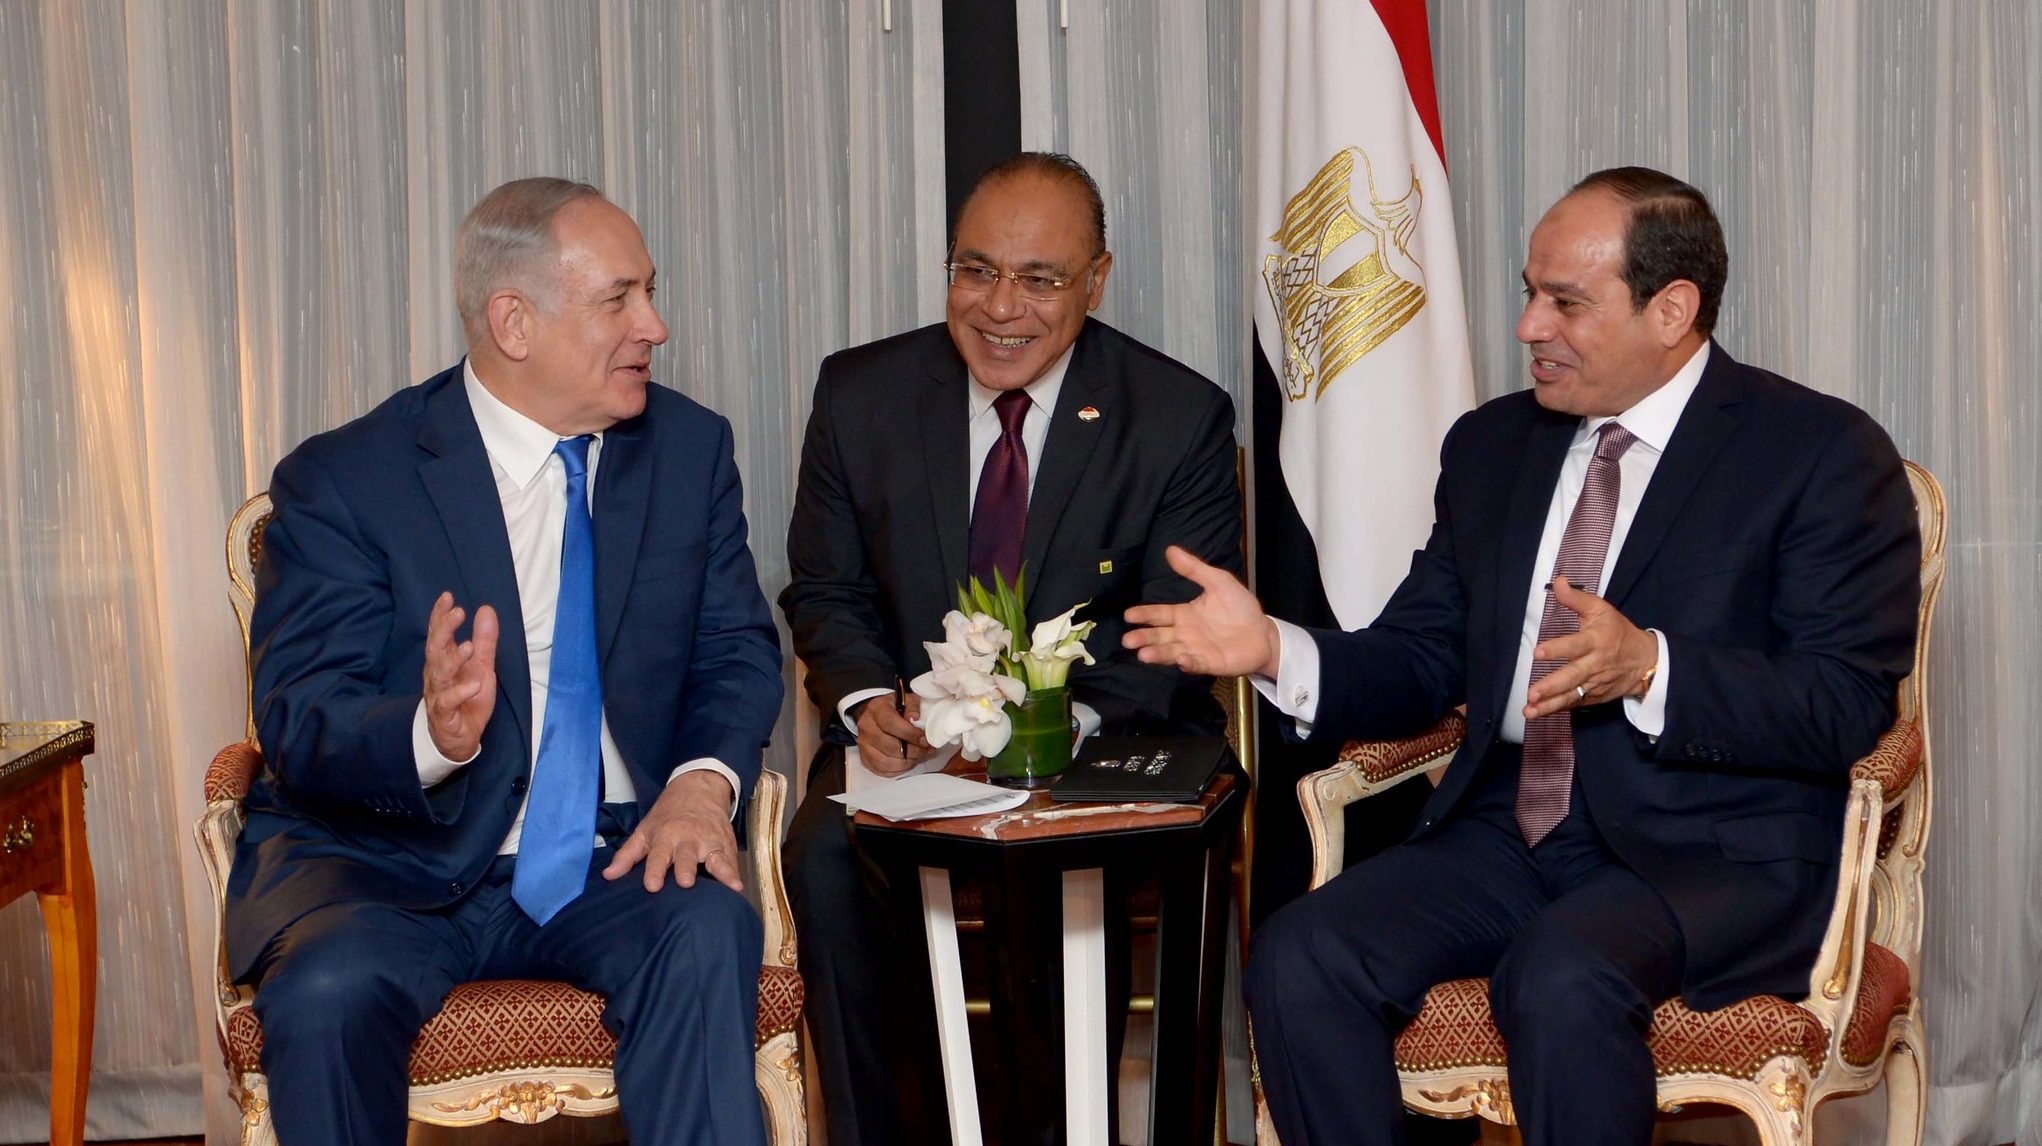 El-Sisi, Netanyahu Are Close but Israel-Egypt Ties Could Depend on Rest of Arab World